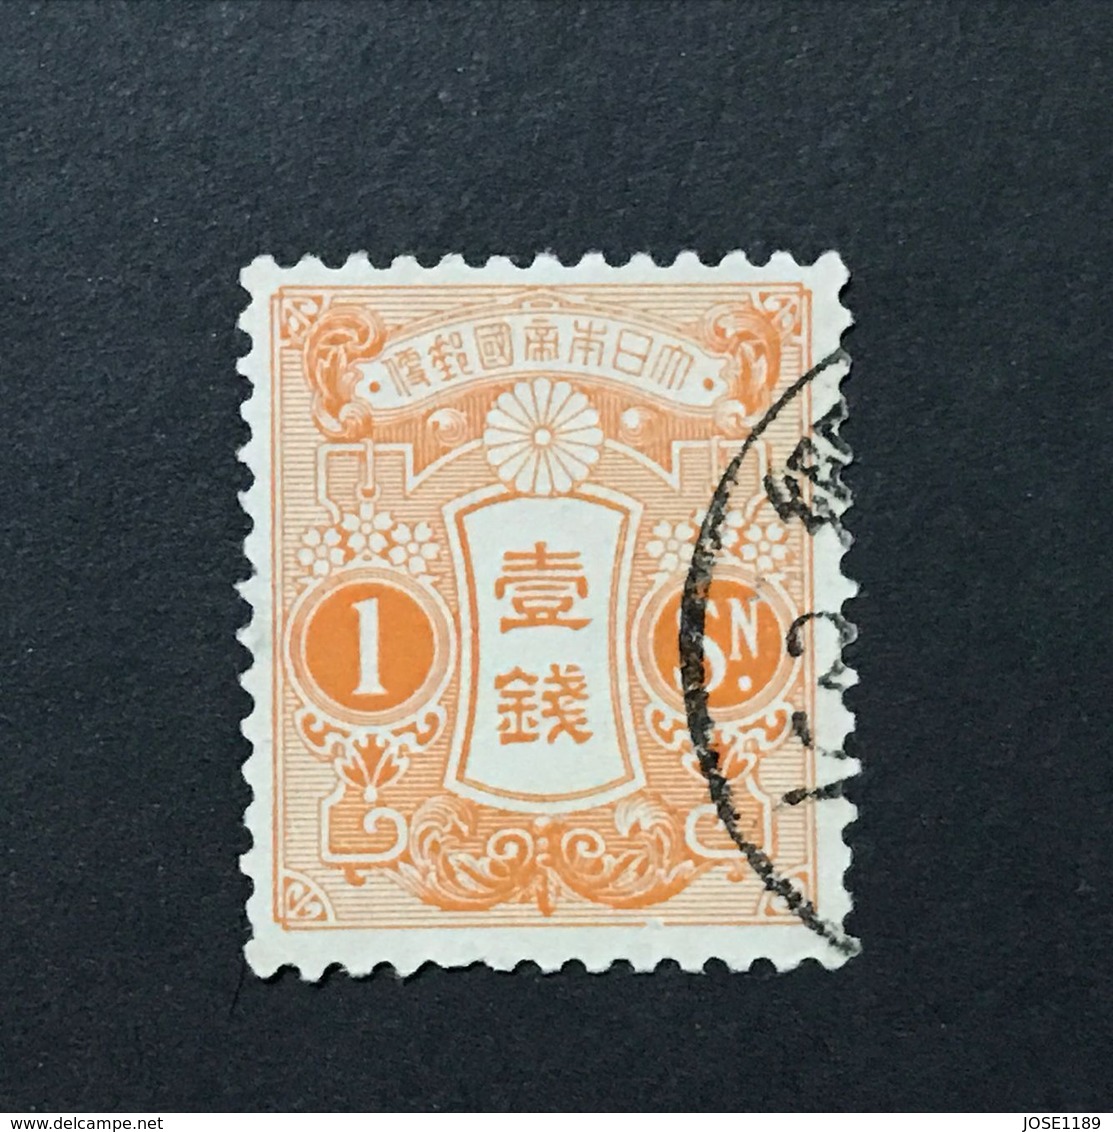 ◆◆◆ Japón  1913  Taisho Stamps Unwmkd. White Paper (Old Die)  1 Sen  USED  19X22.5   AA328 - Used Stamps